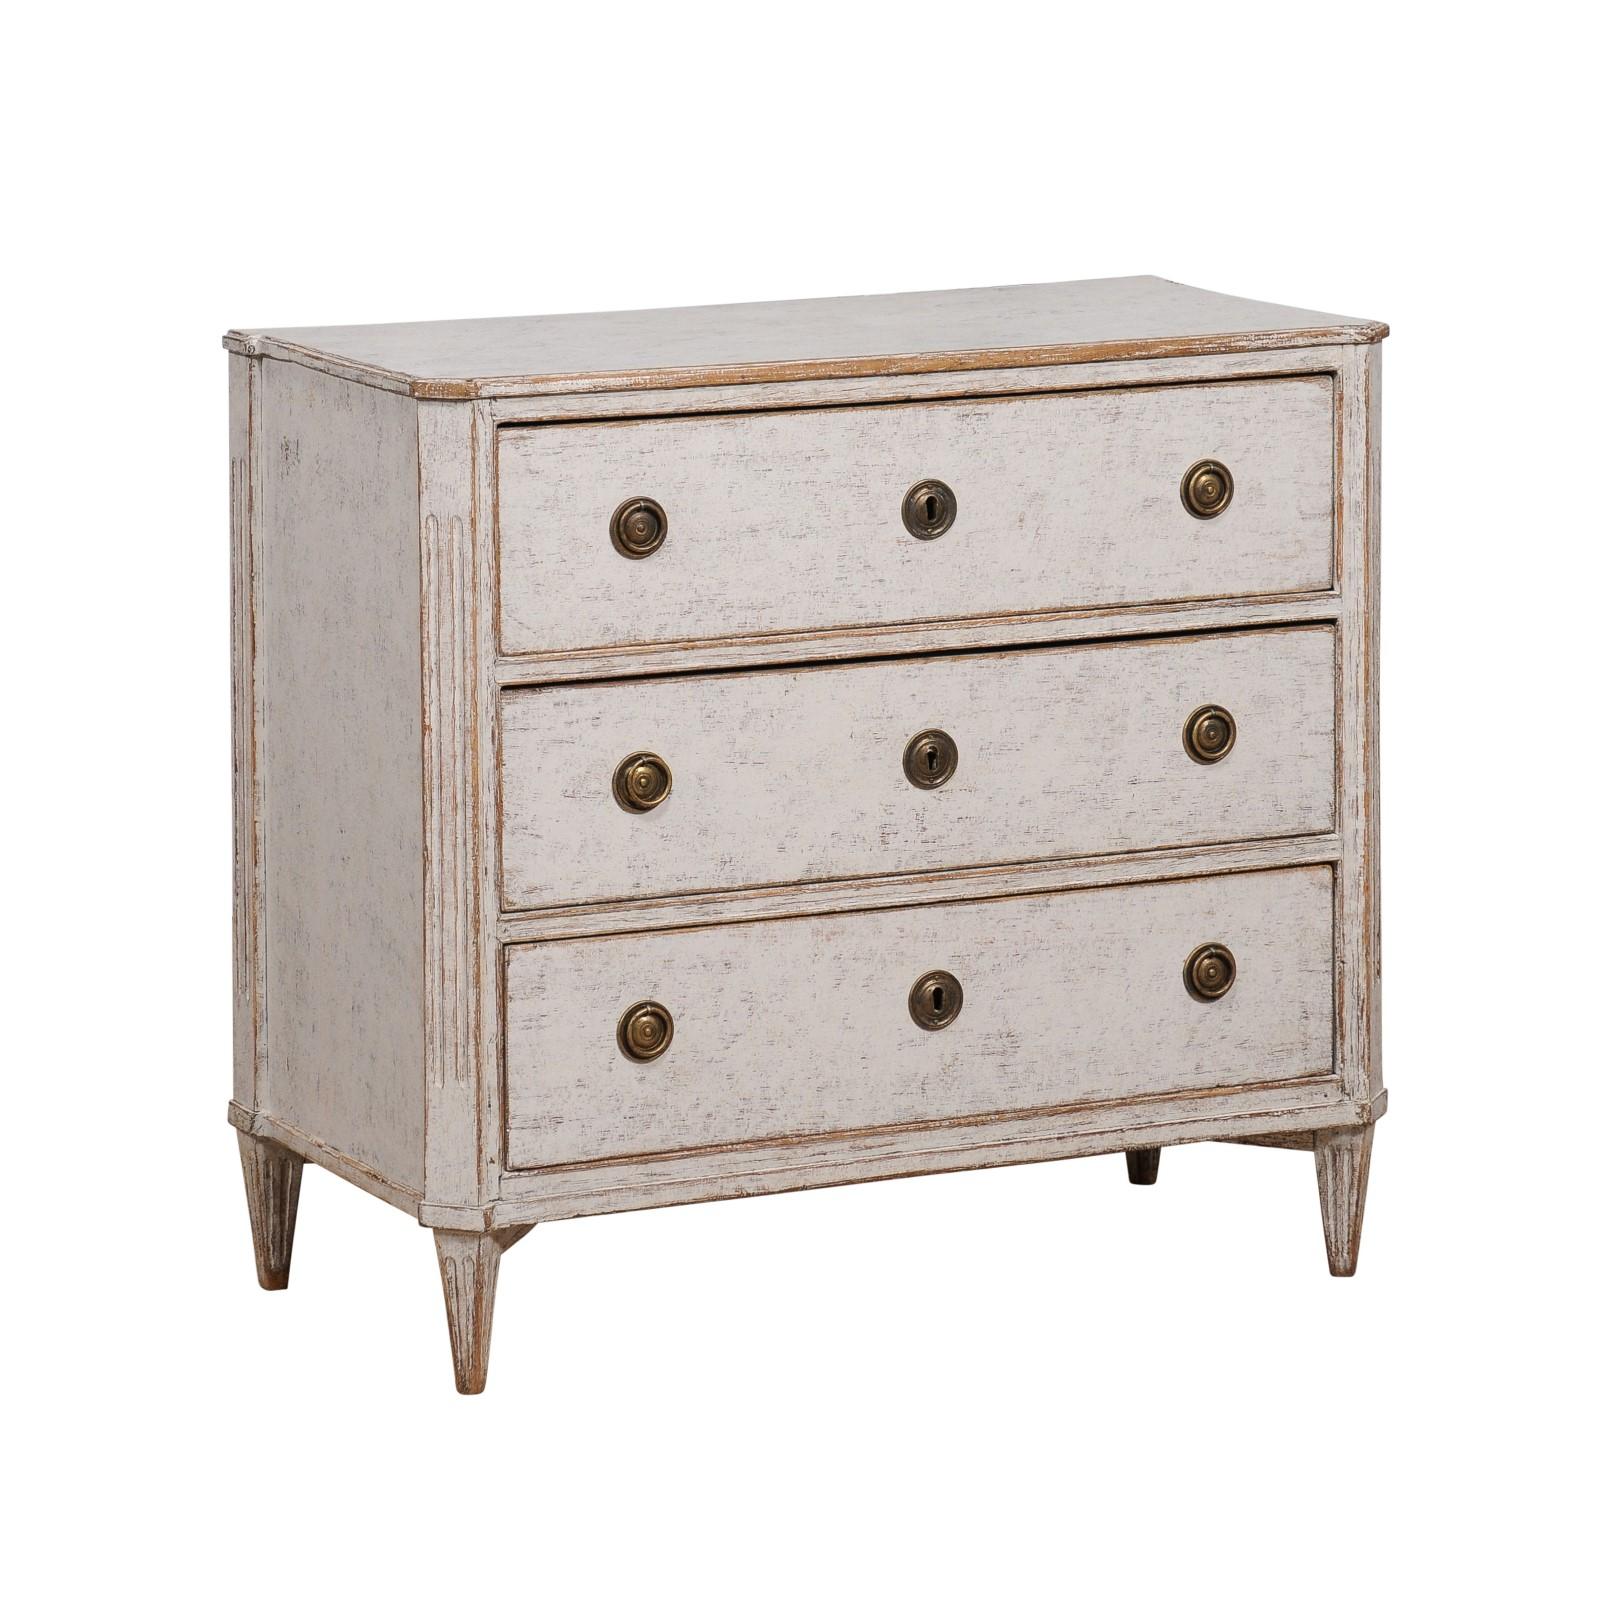 A Swedish Gustavian period light dove grey painted chest from circa 1800 with three dovetail drawers, canted side posts and fluted tapering feet. Evoking the serene elegance of the Swedish Gustavian period, this dove grey painted chest, circa 1800,